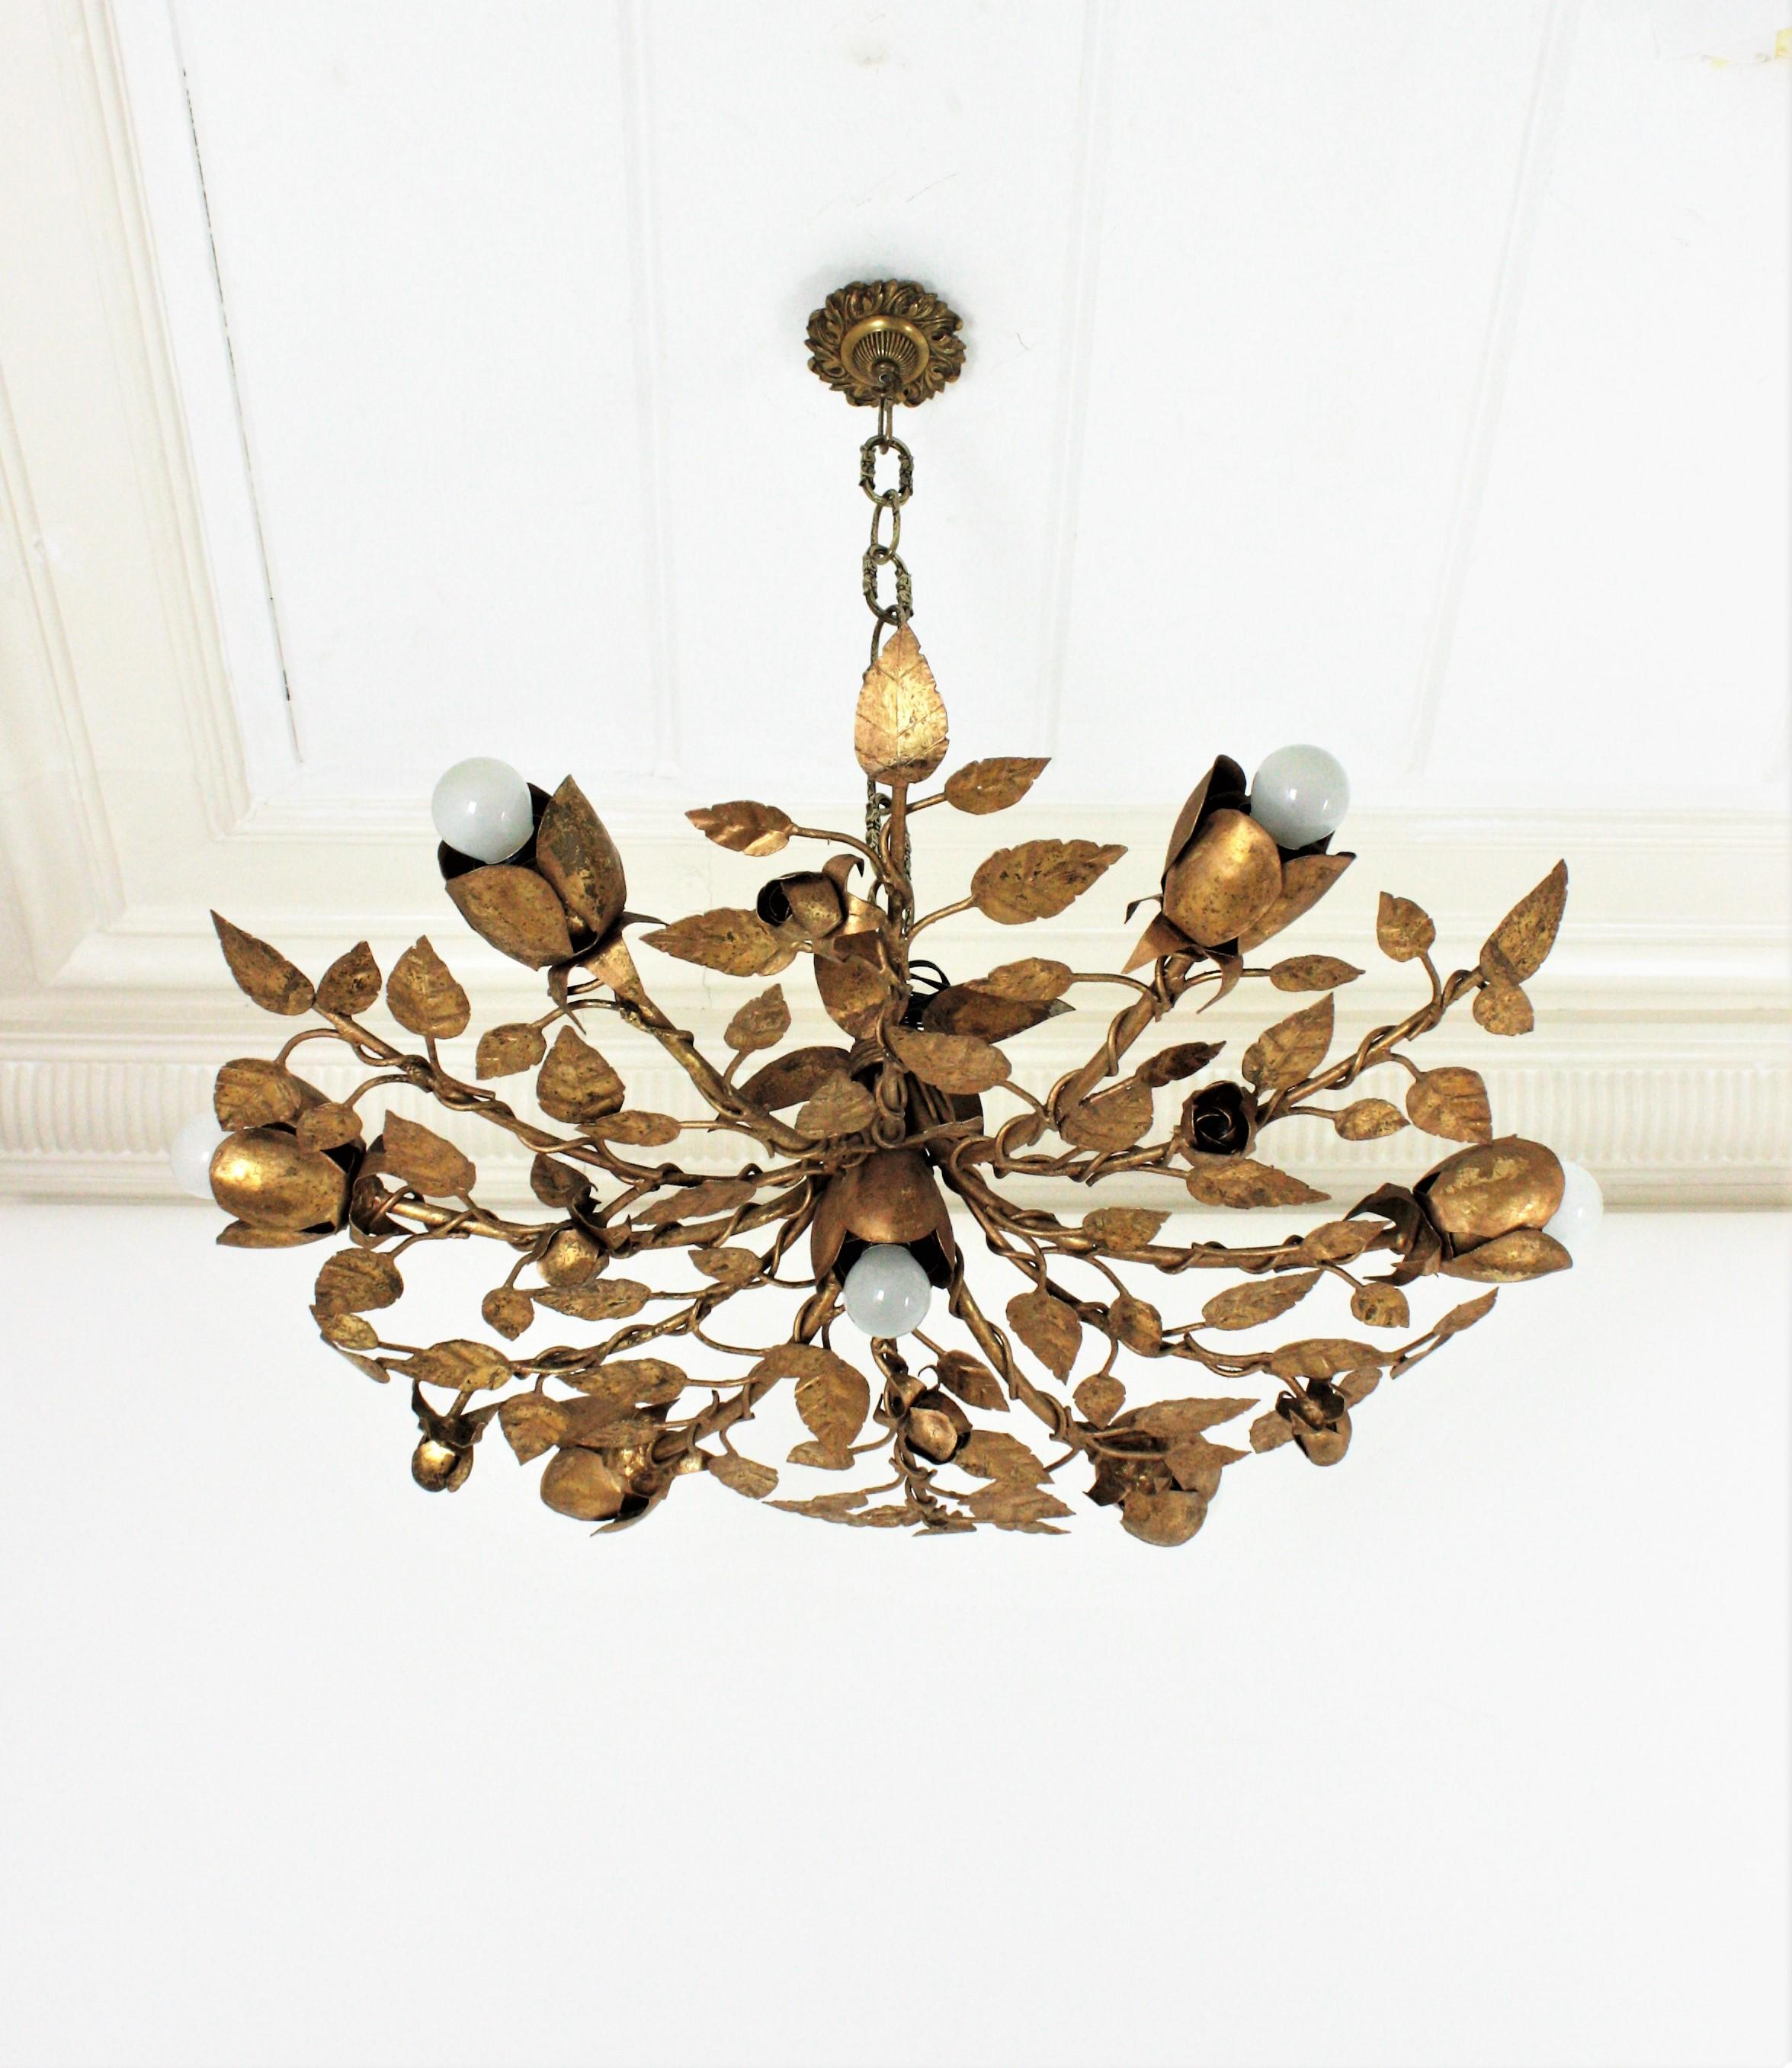 Outstanding large size gilt iron ornate foliage flower bush ceiling sconce or flushmount with seven rose shaped light holders. Spain, 1960s.
This seven-light ceiling lamp features an intrincate of branches with leaves in different sizes adorned by